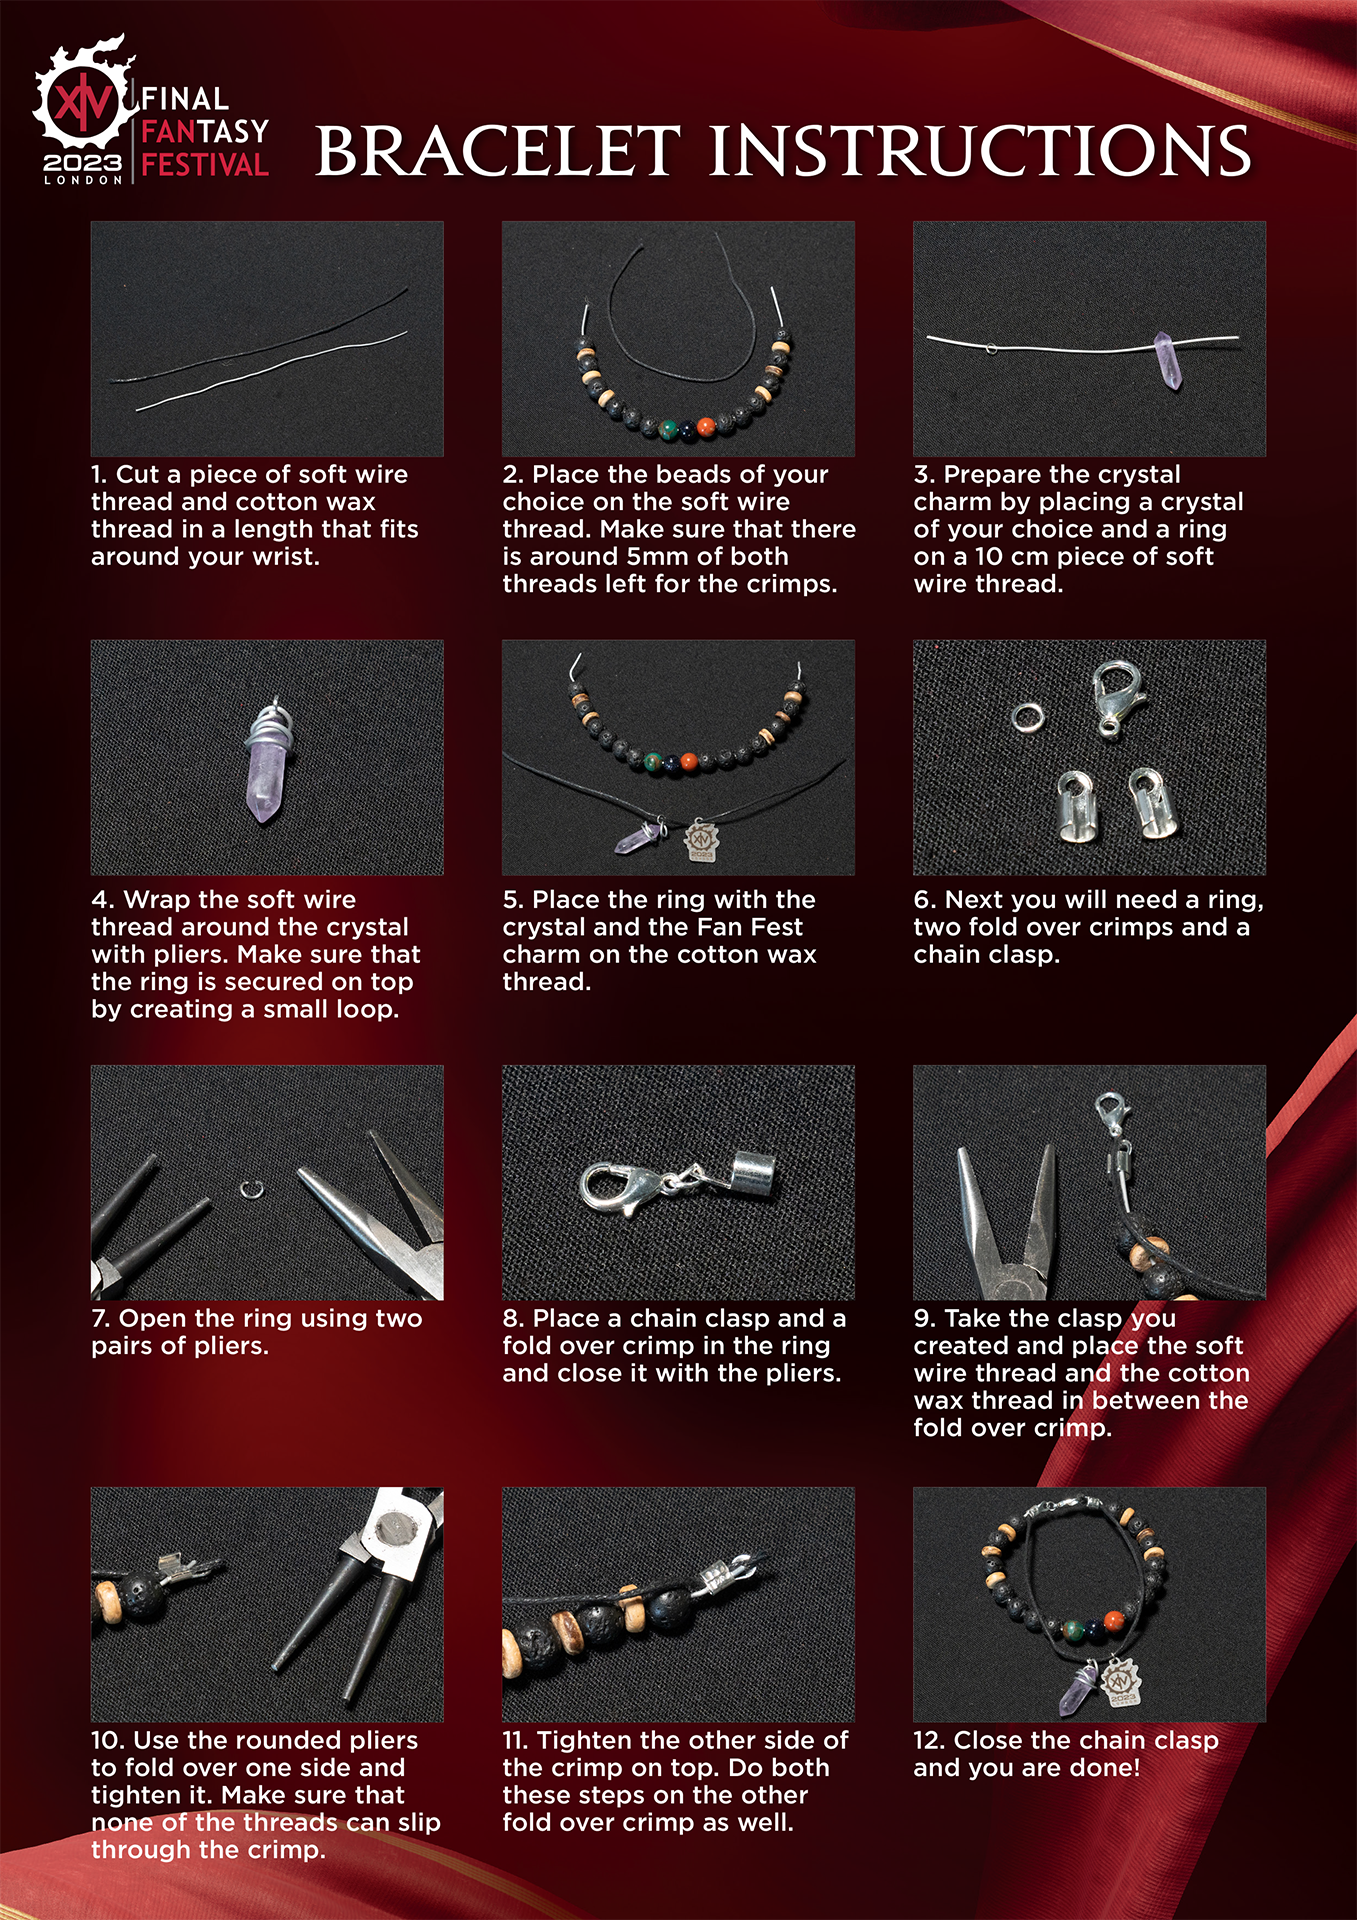 Detailed instructions on how to make your own bracelet. Fan Festival 2023 in London.